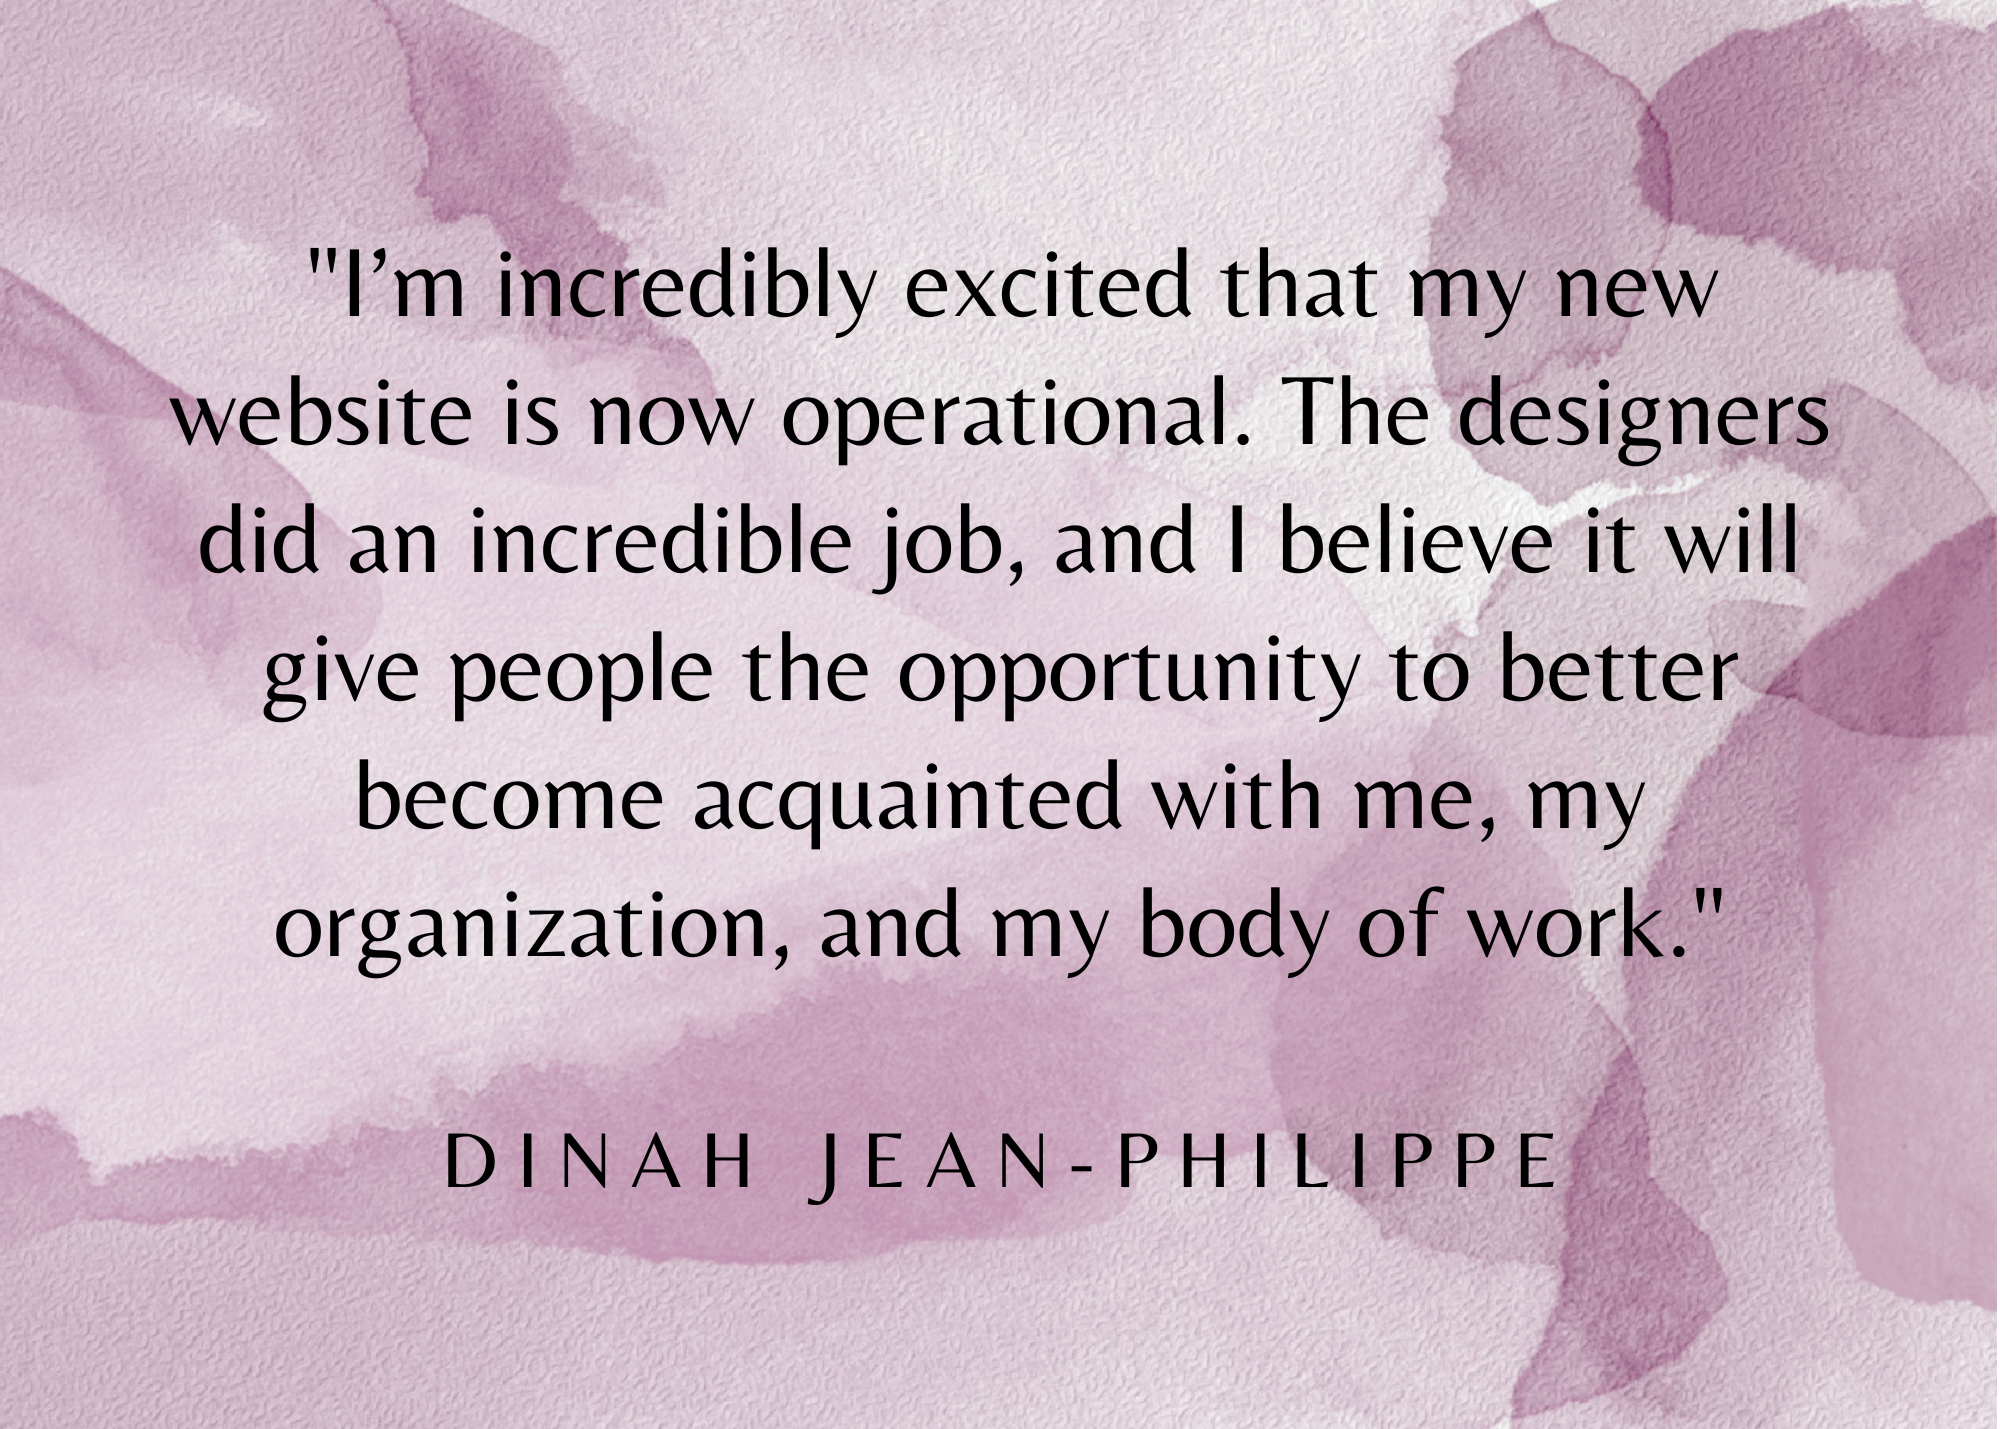 Dinah Jean-Philippe, Monday, January 16, 2023, Press release picture